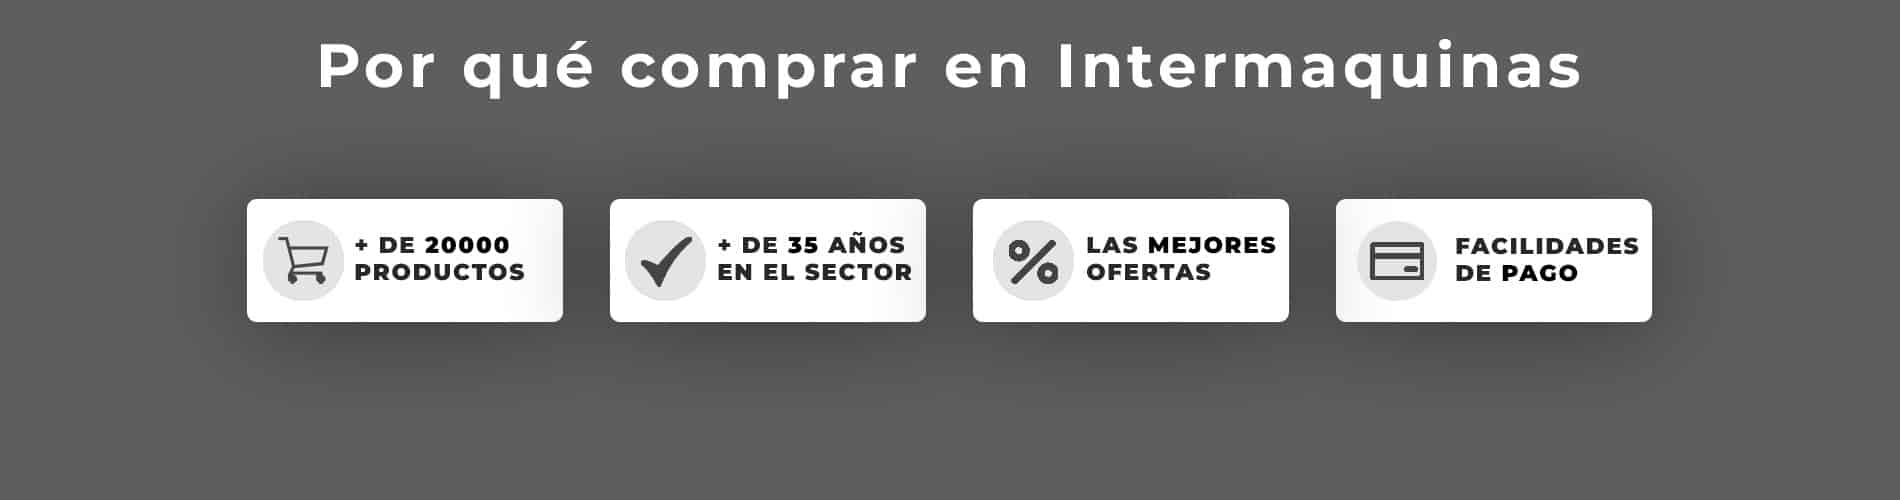 why buy in intermaquinas v2